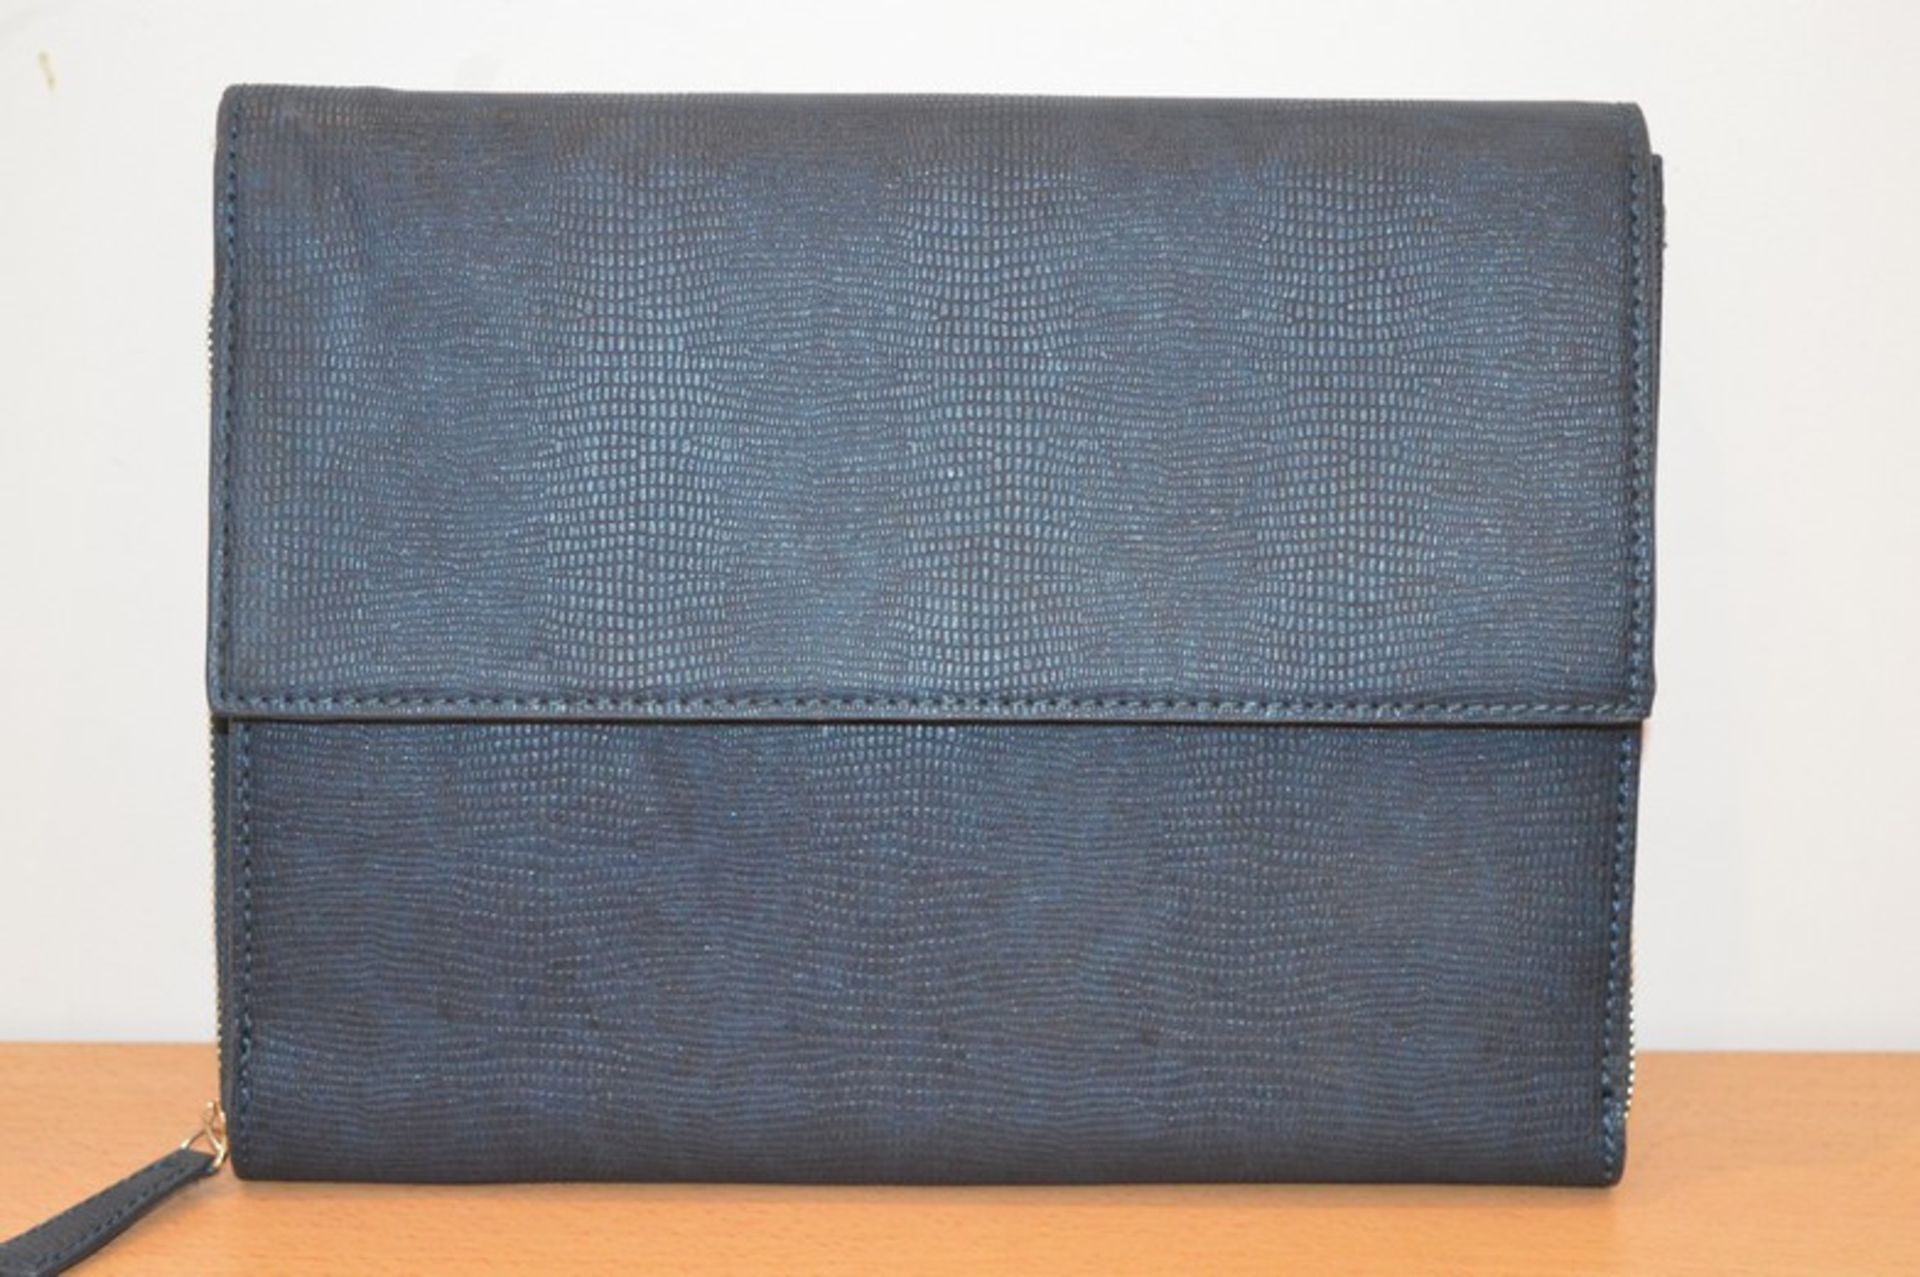 BRAND NEW COLLECTION BY JOHN LEWIS BLUE SNAKE SKIN EFFECT LEATHER LADIES CLUTH BAG WITH SHOULDER